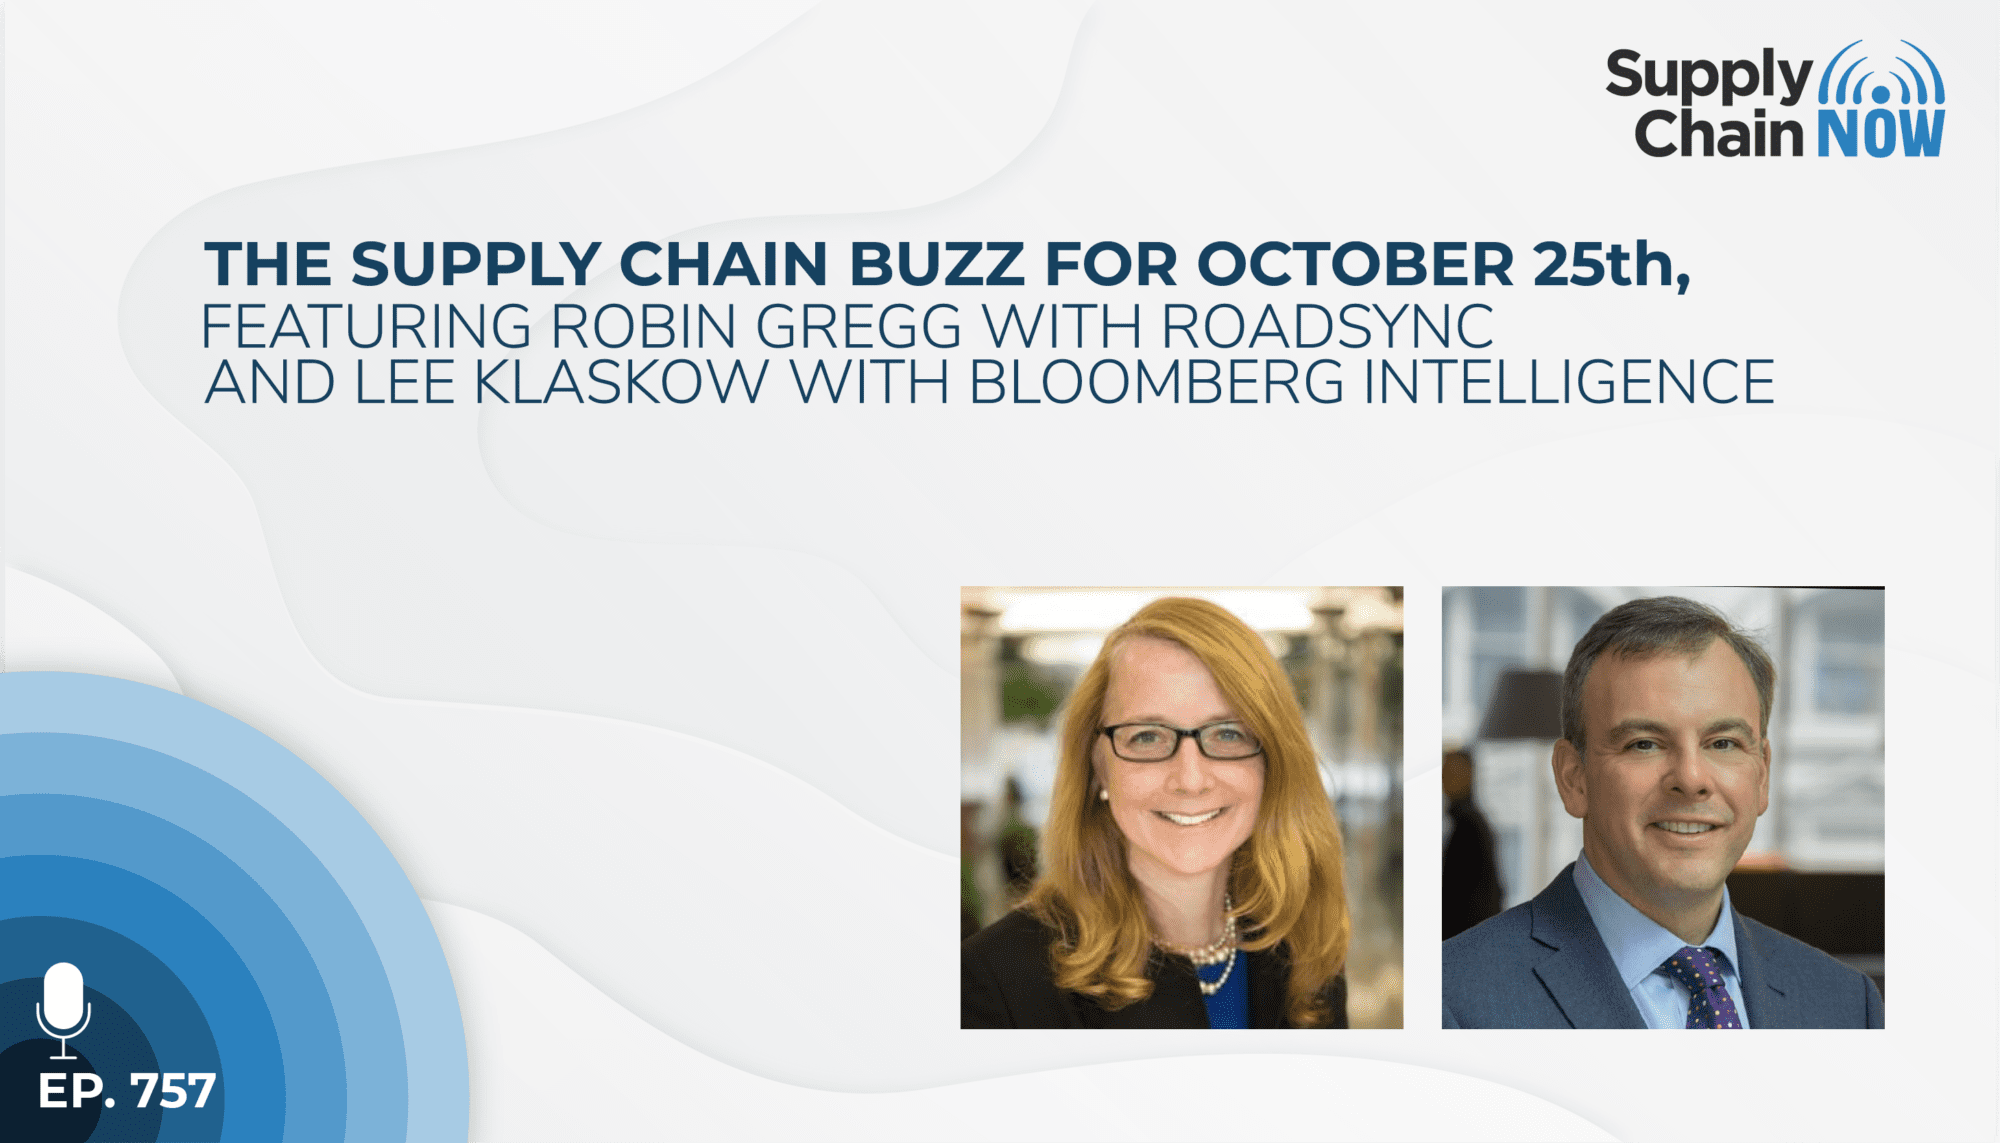 The Supply Chain Buzz for October 25th Featuring Robin Gregg with Roadsync  and Lee Klaskow with Bloomberg Intelligence - Supply Chain Now